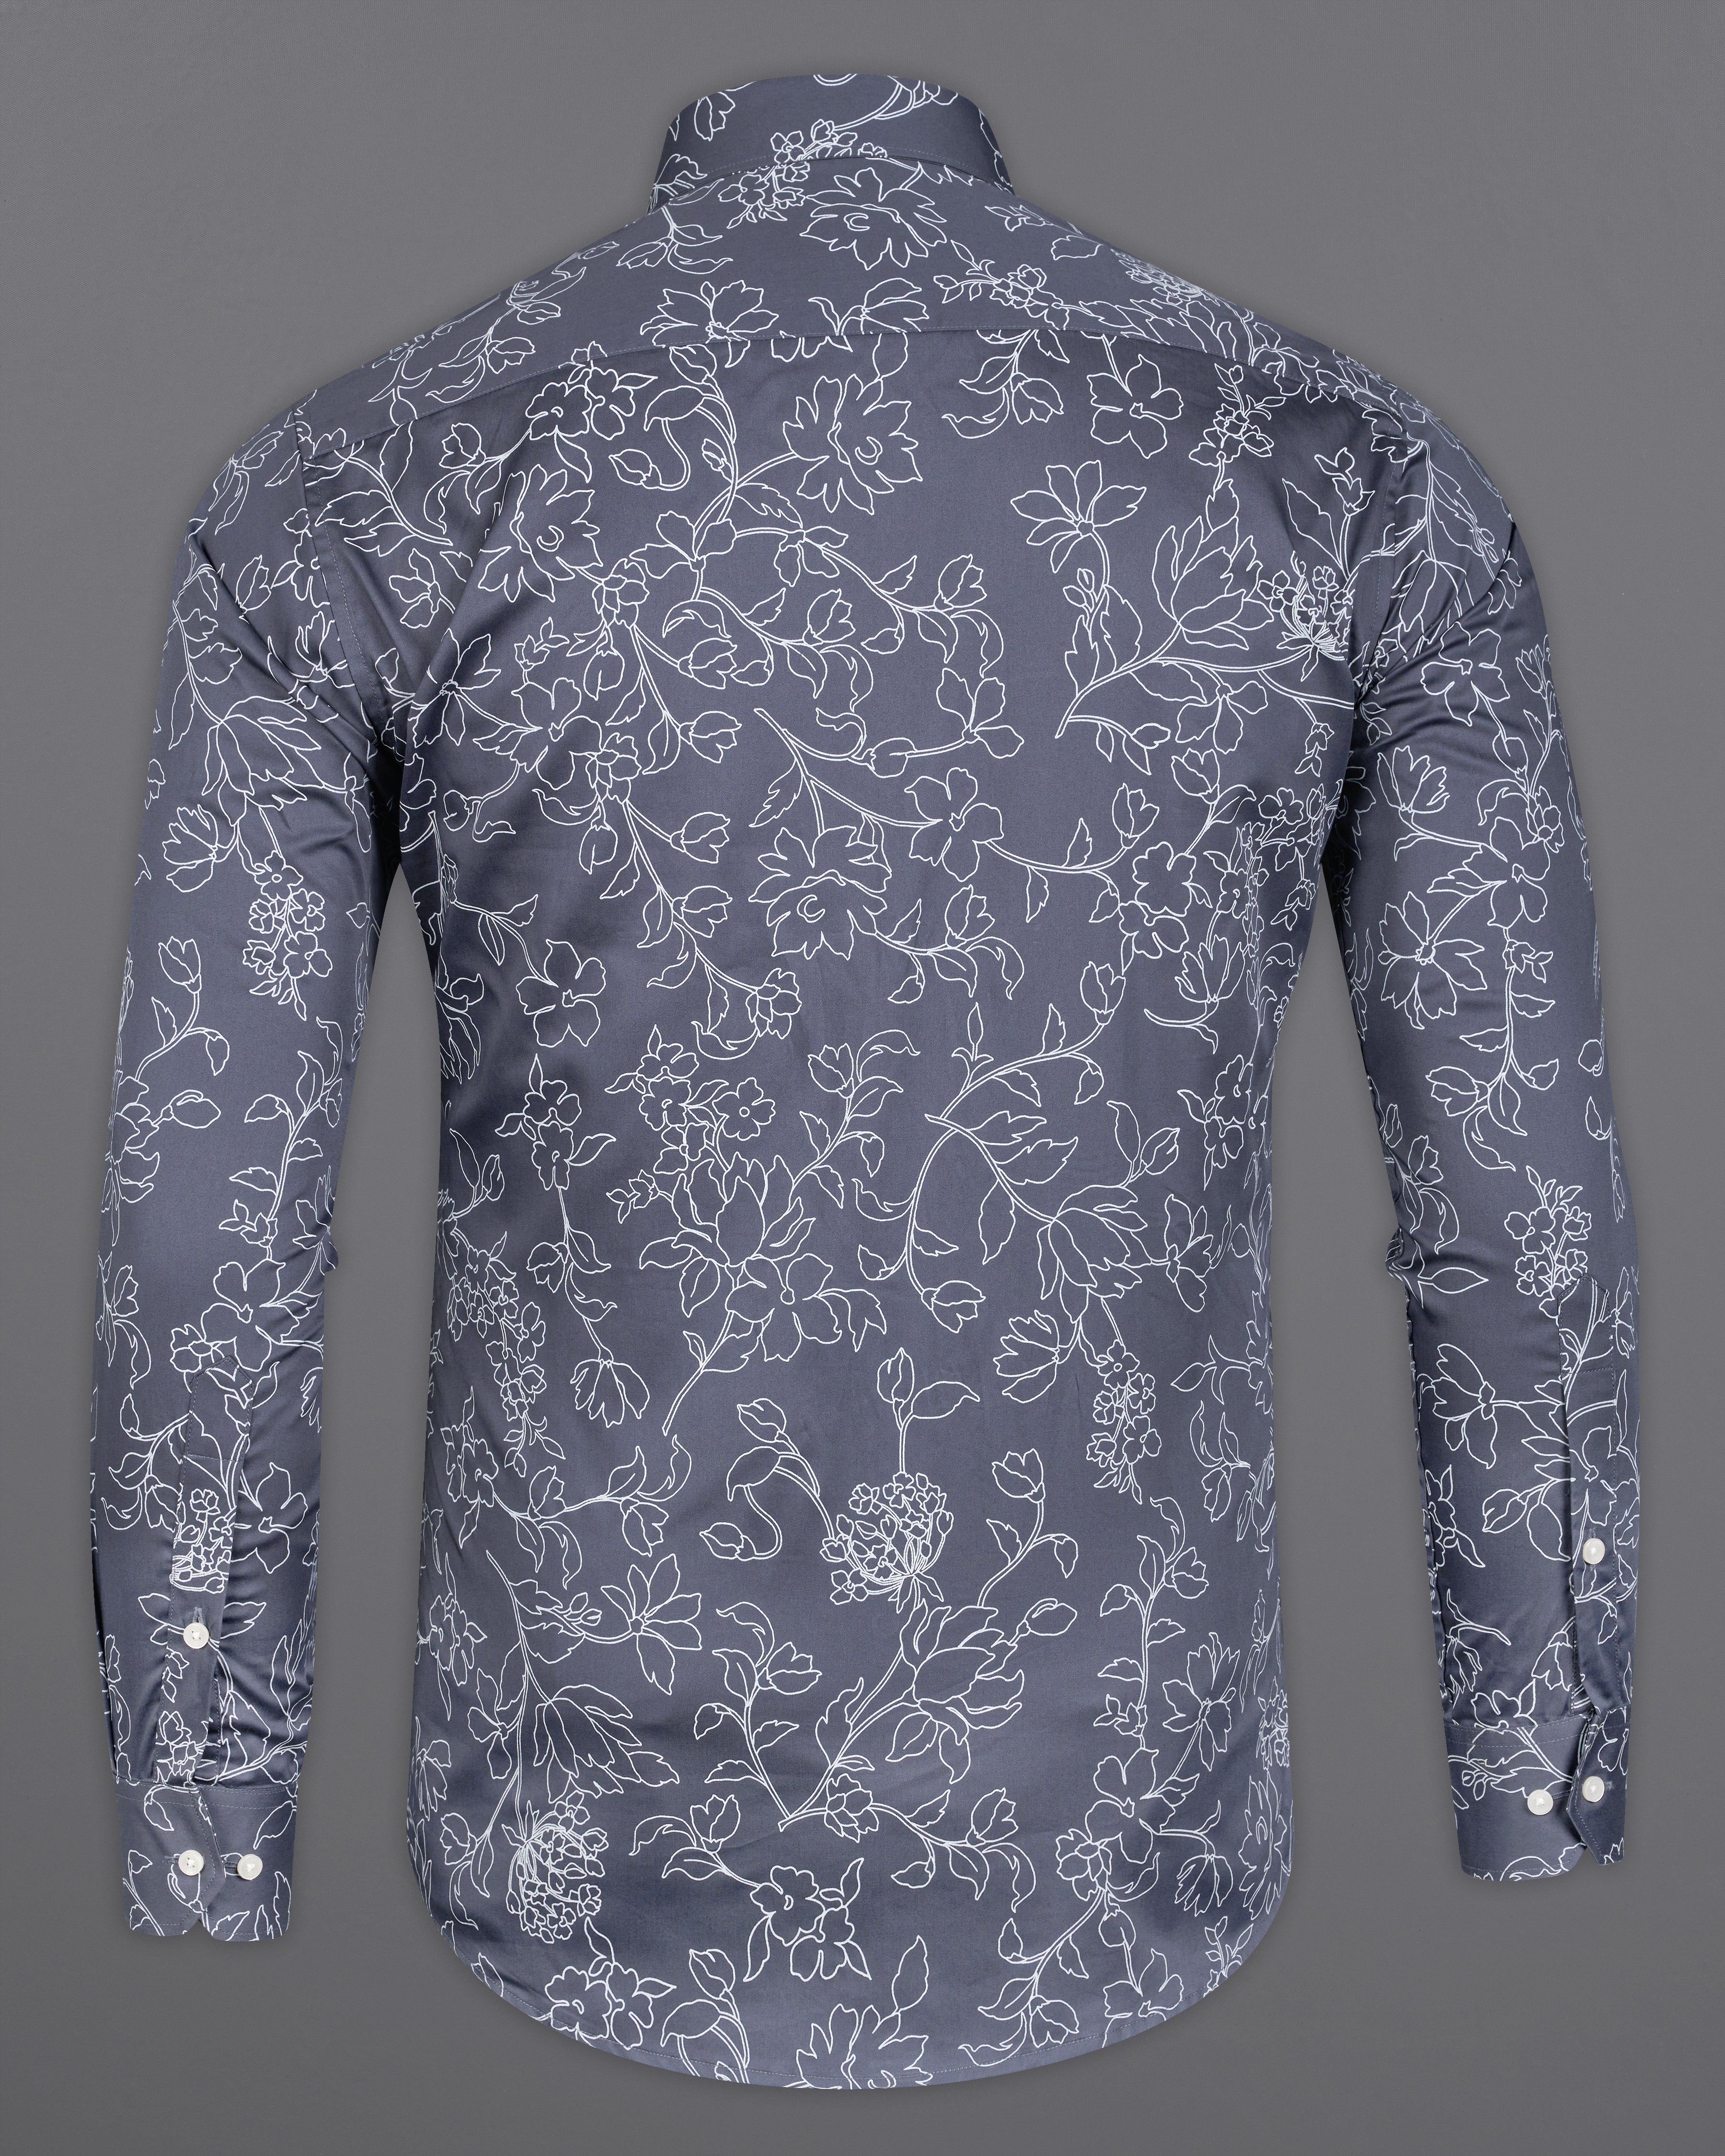 Mulled Wine Dark Gray and White Floral Printed Super Soft Premium Cotton Shirt 9952-38, 9952-H-38, 9952-39, 9952-H-39, 9952-40, 9952-H-40, 9952-42, 9952-H-42, 9952-44, 9952-H-44, 9952-46, 9952-H-46, 9952-48, 9952-H-48, 9952-50, 9952-H-50, 9952-52, 9952-H-52